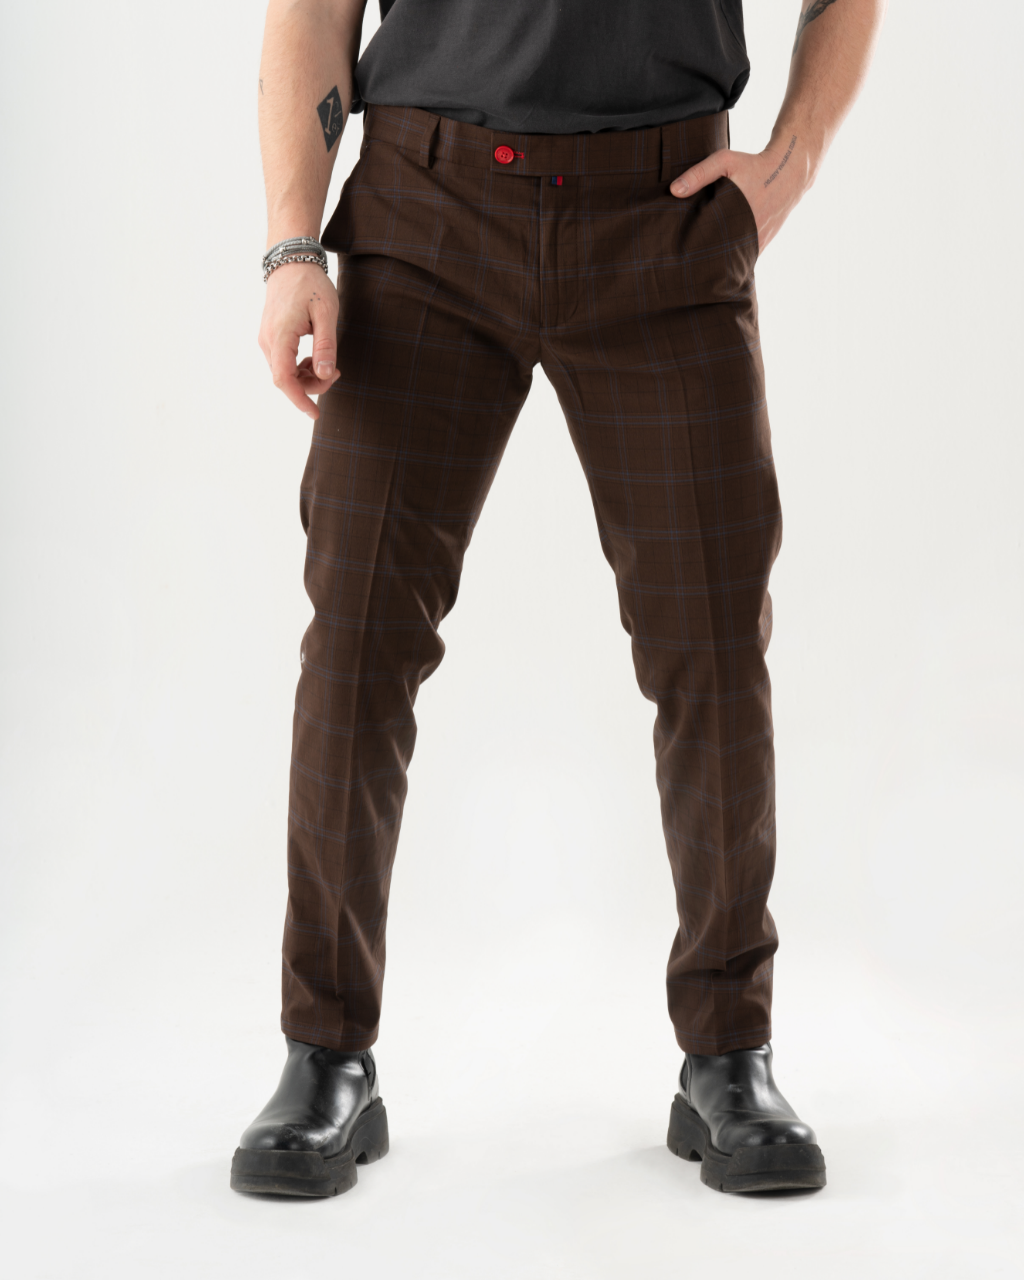 A man in a black shirt and HIGH-CASTLE PANTS is posing for a photo, showcasing his trendy mens streetwear.